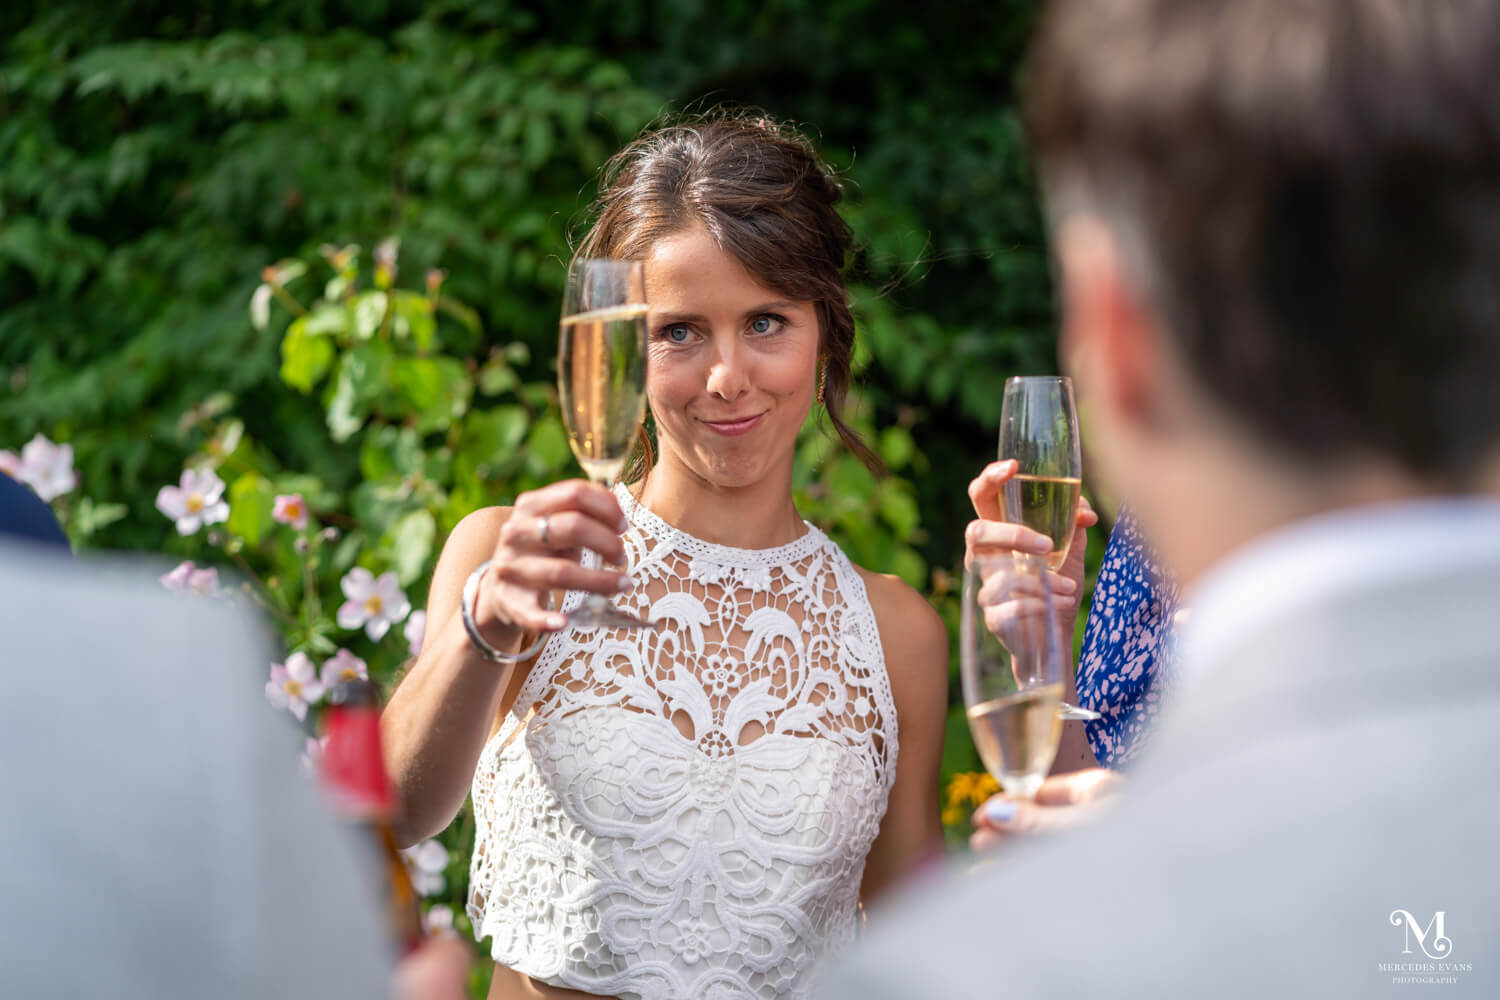 the bride wearing a white lace top, shares a champagne toast with guests